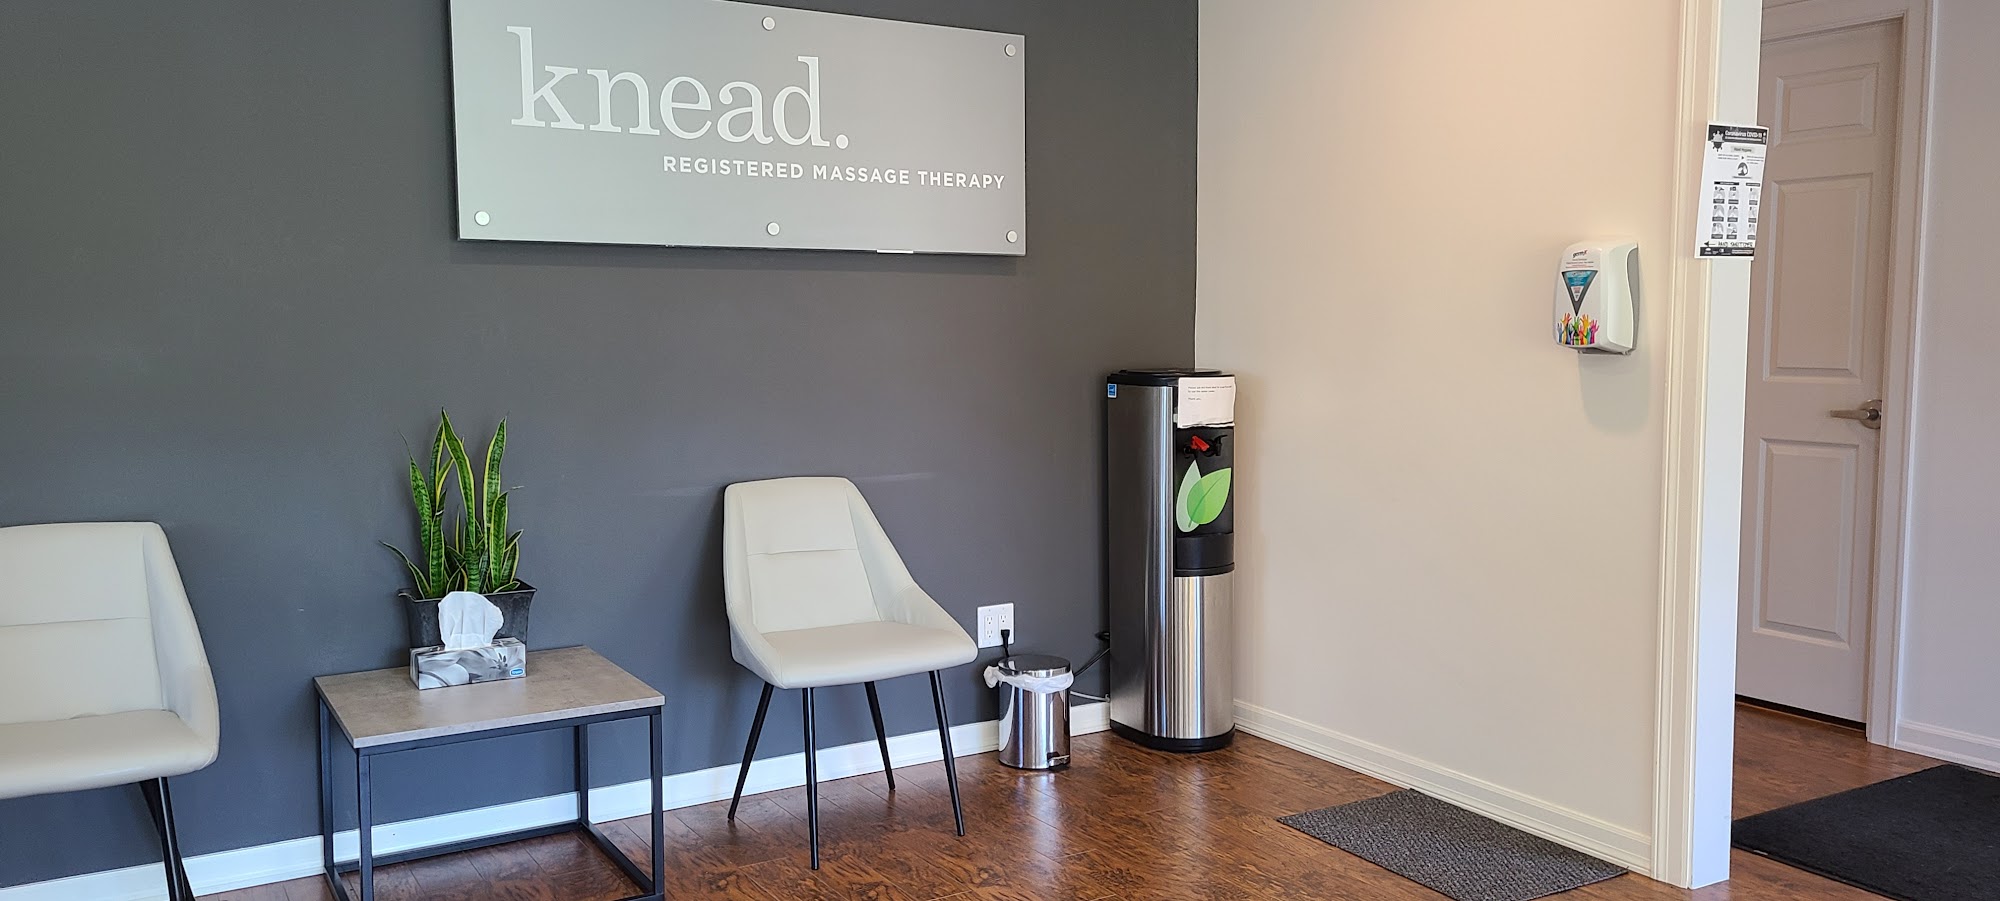 Knead Registered Massage Therapy